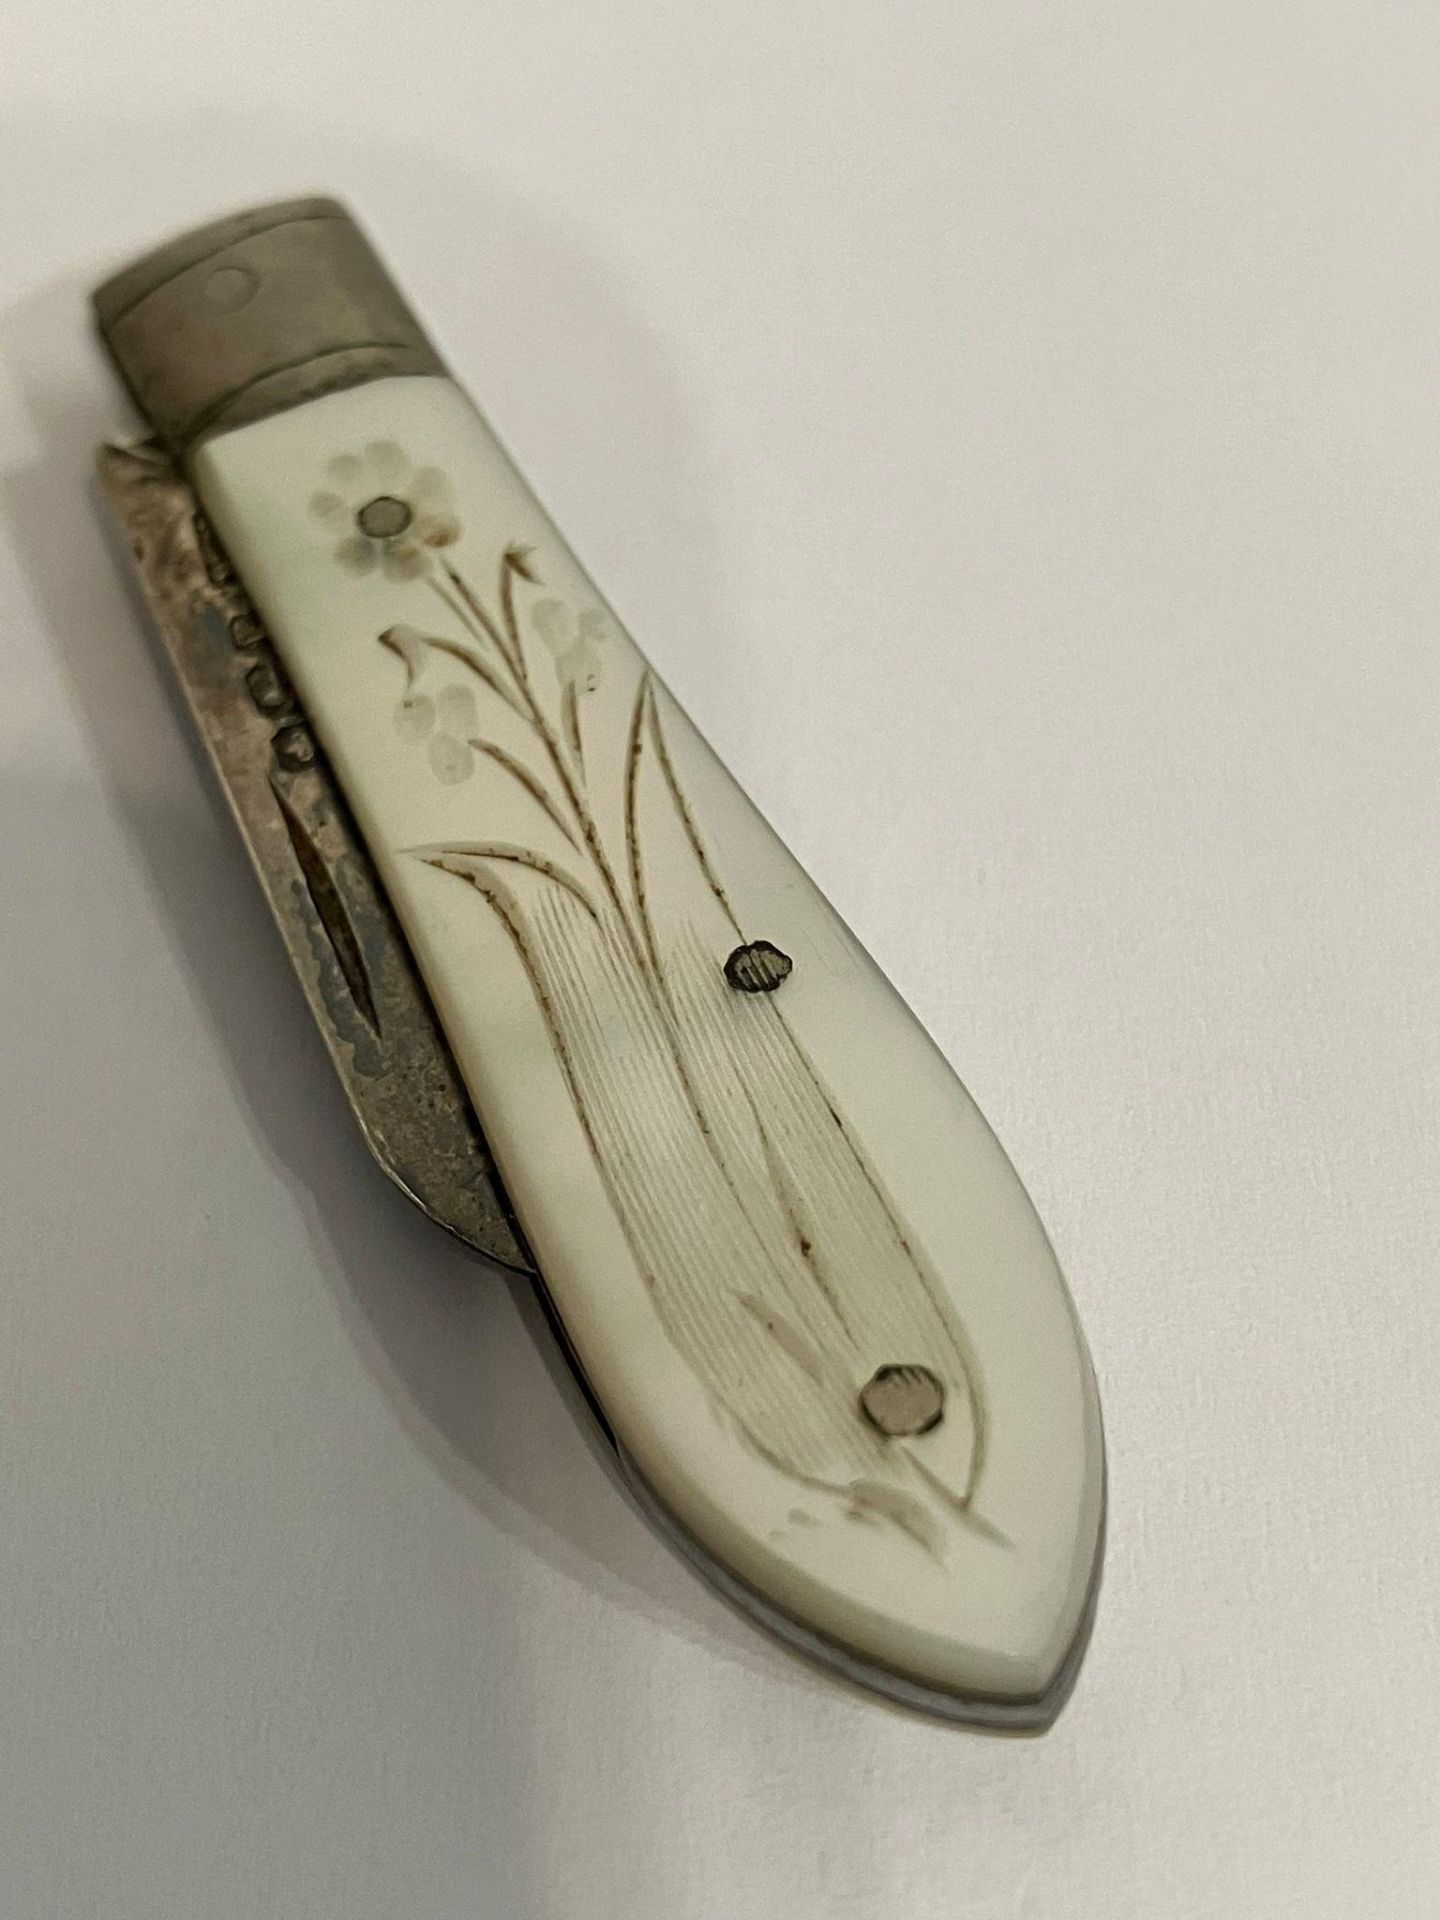 Antique SILVER BLADED FRUIT KNIFE . Having mother of pearl handle with floral engraving. Purse size.